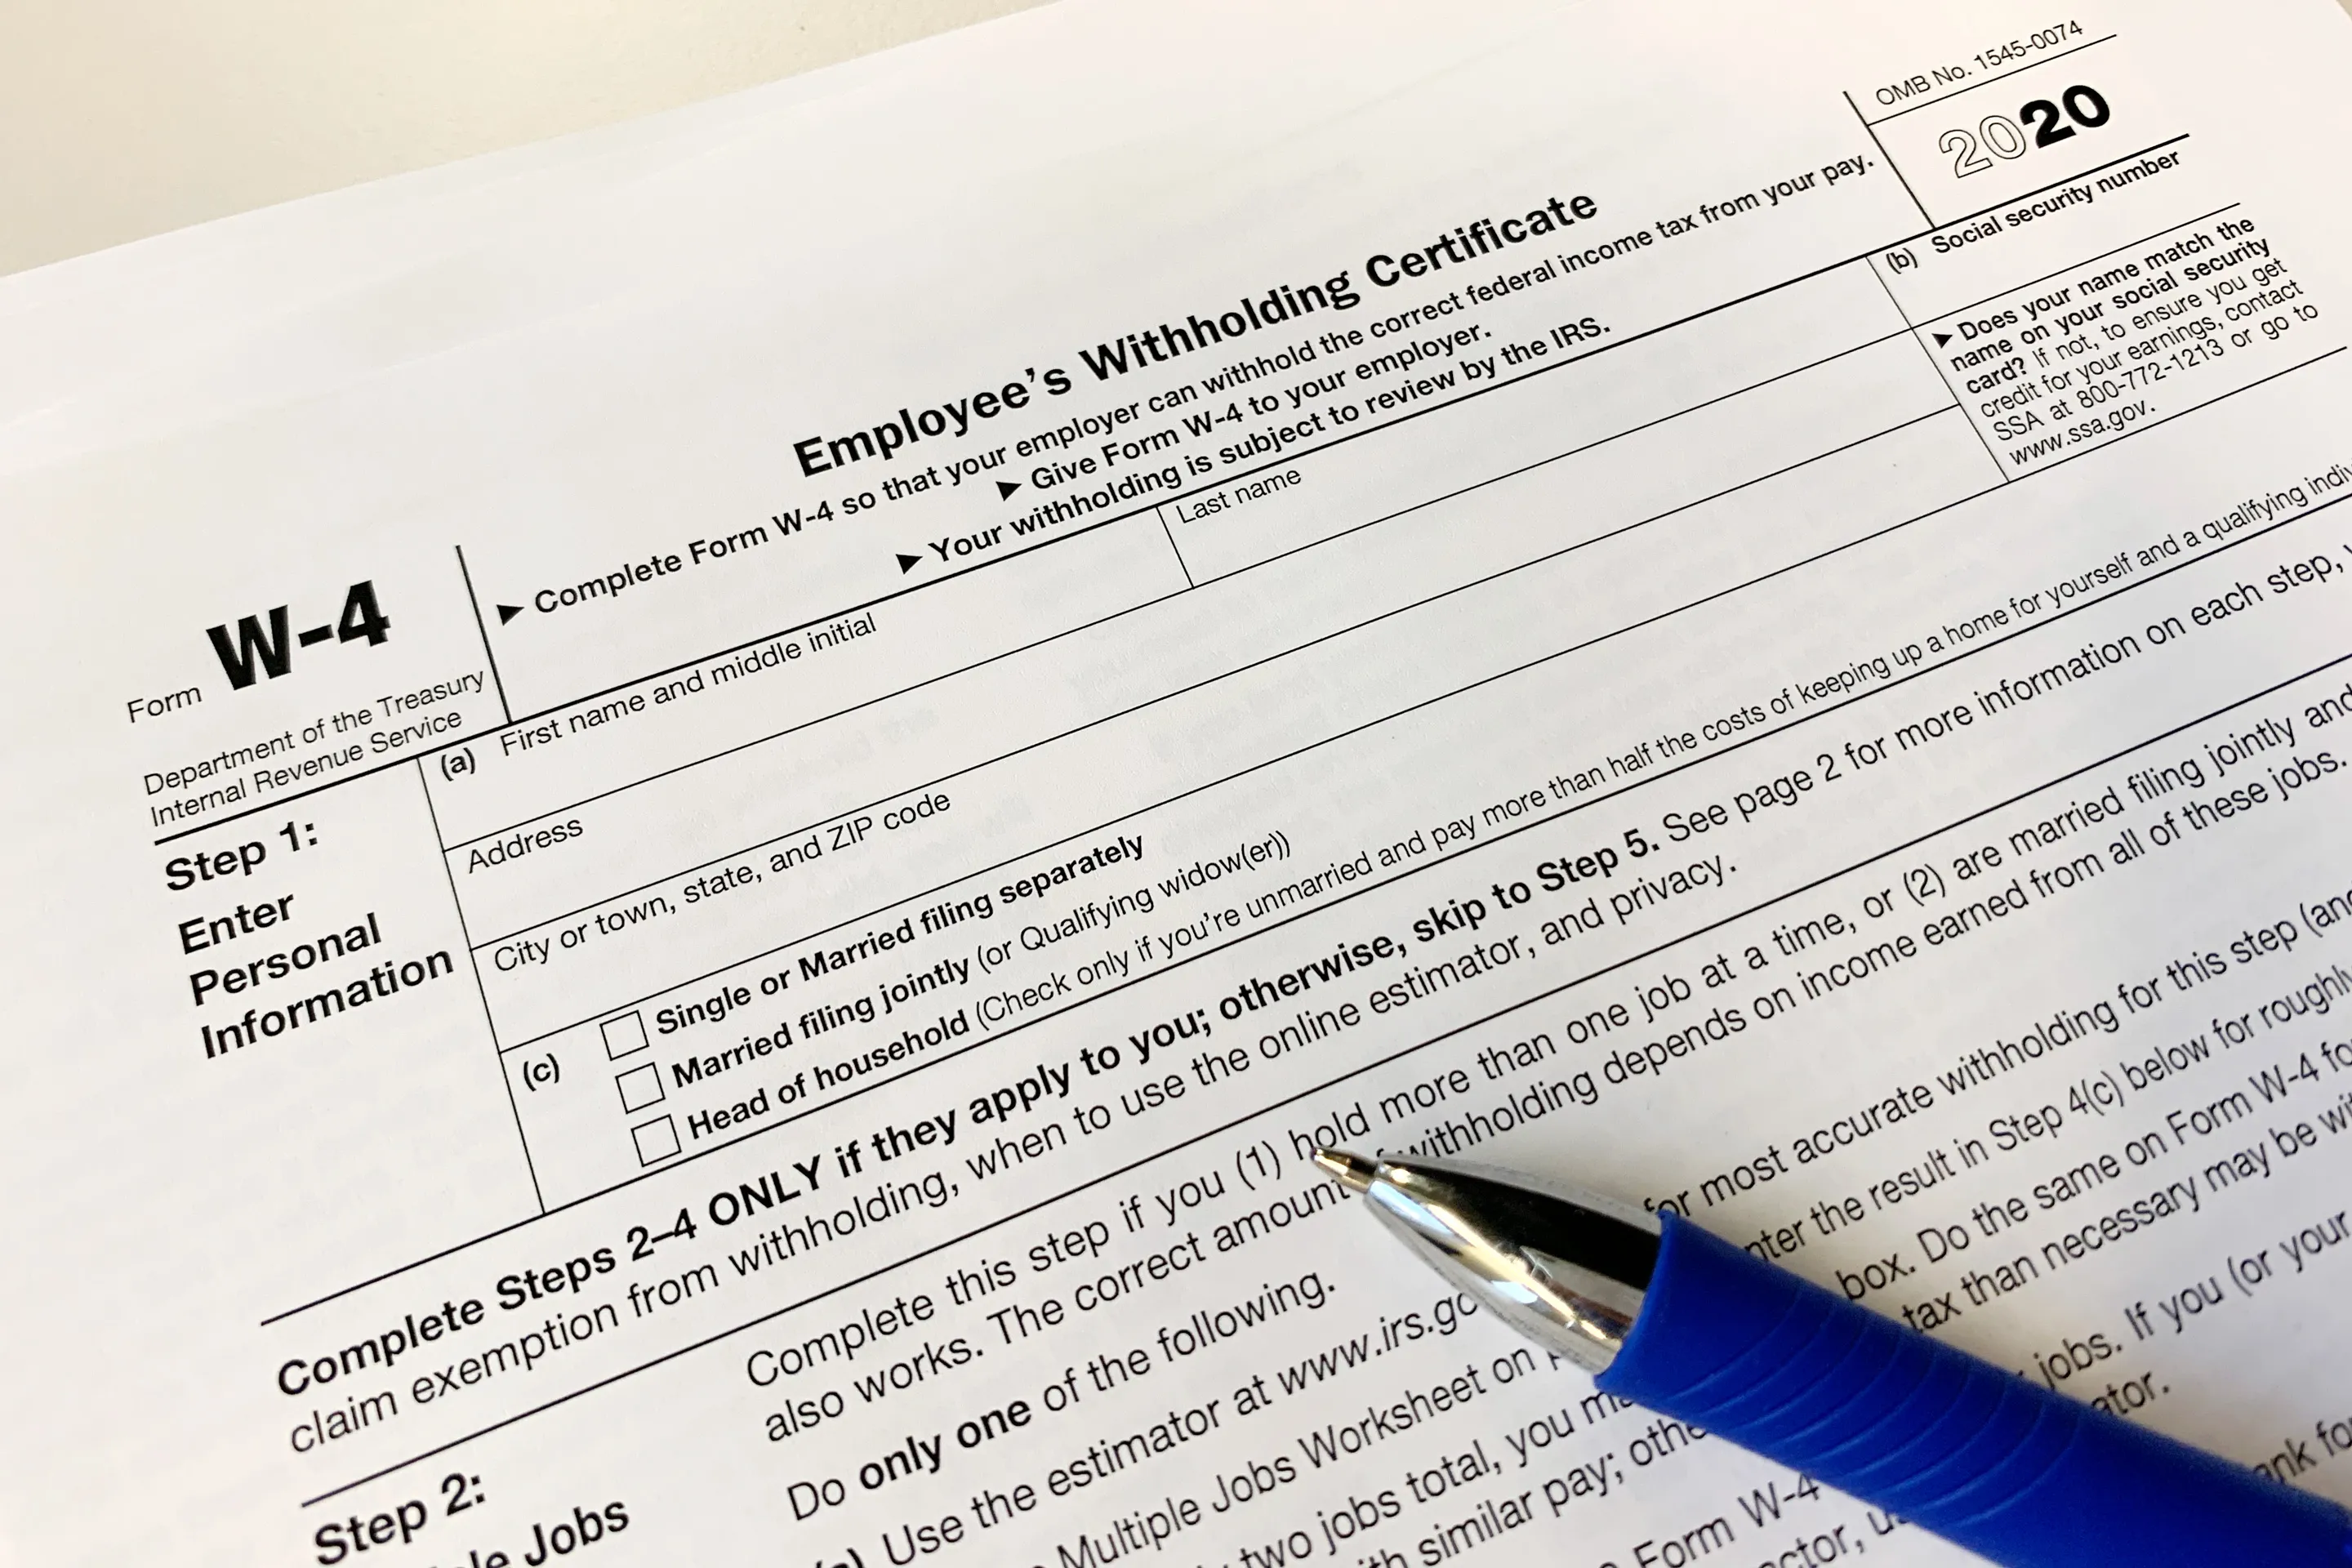 The IRS Has a New, 'Easier' W-4 for Withholding Taxes in 2020. Here's What You Need to Know